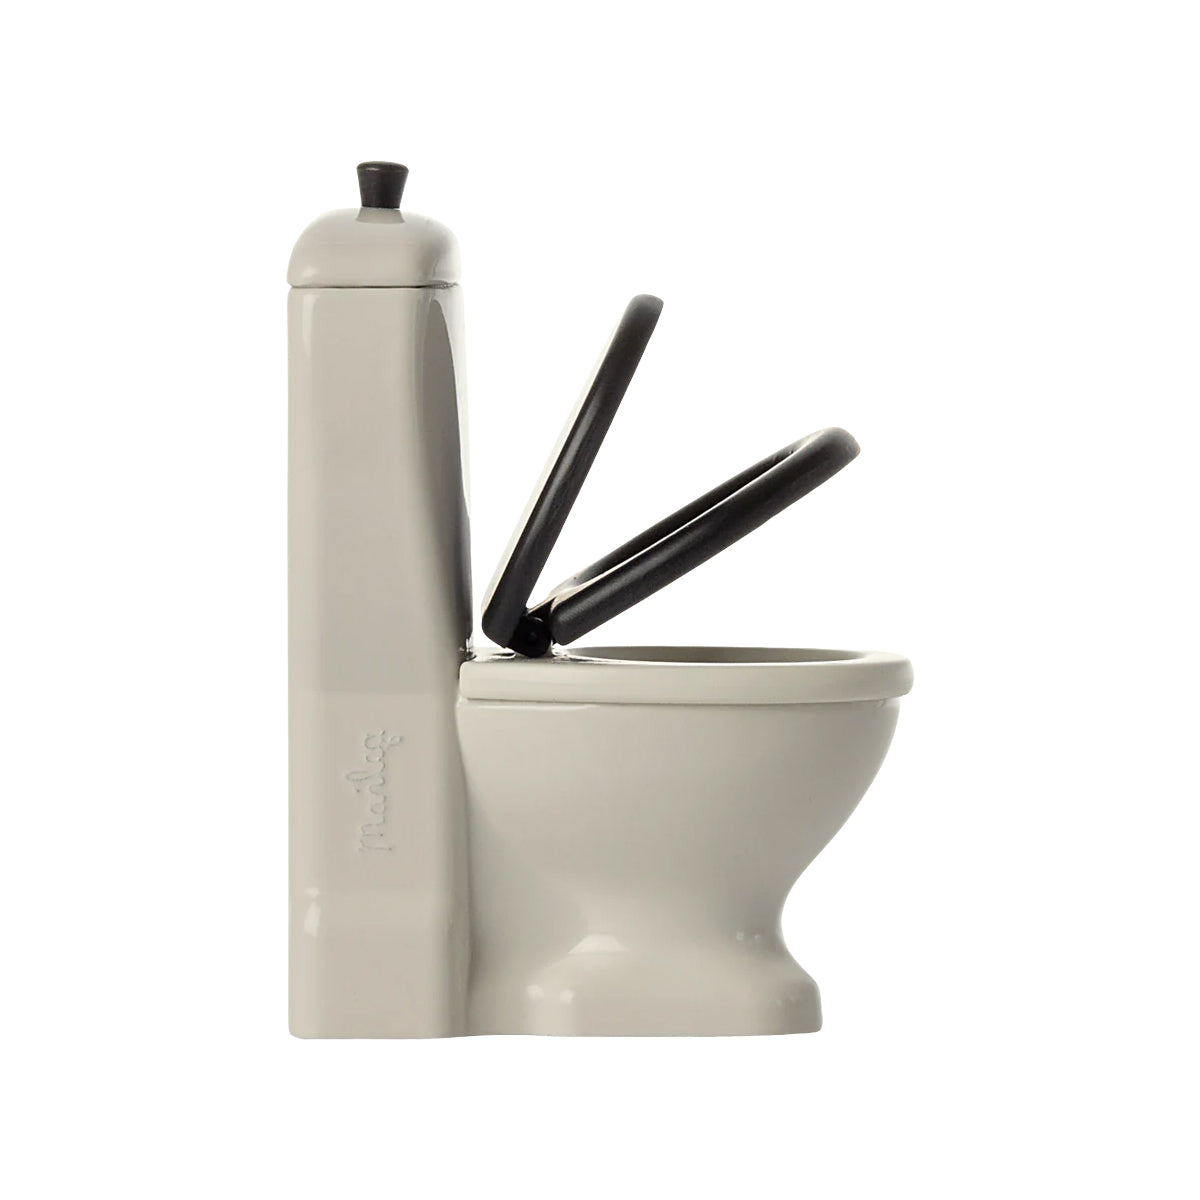 Maileg Mouse Toilet with opening and closing lid.